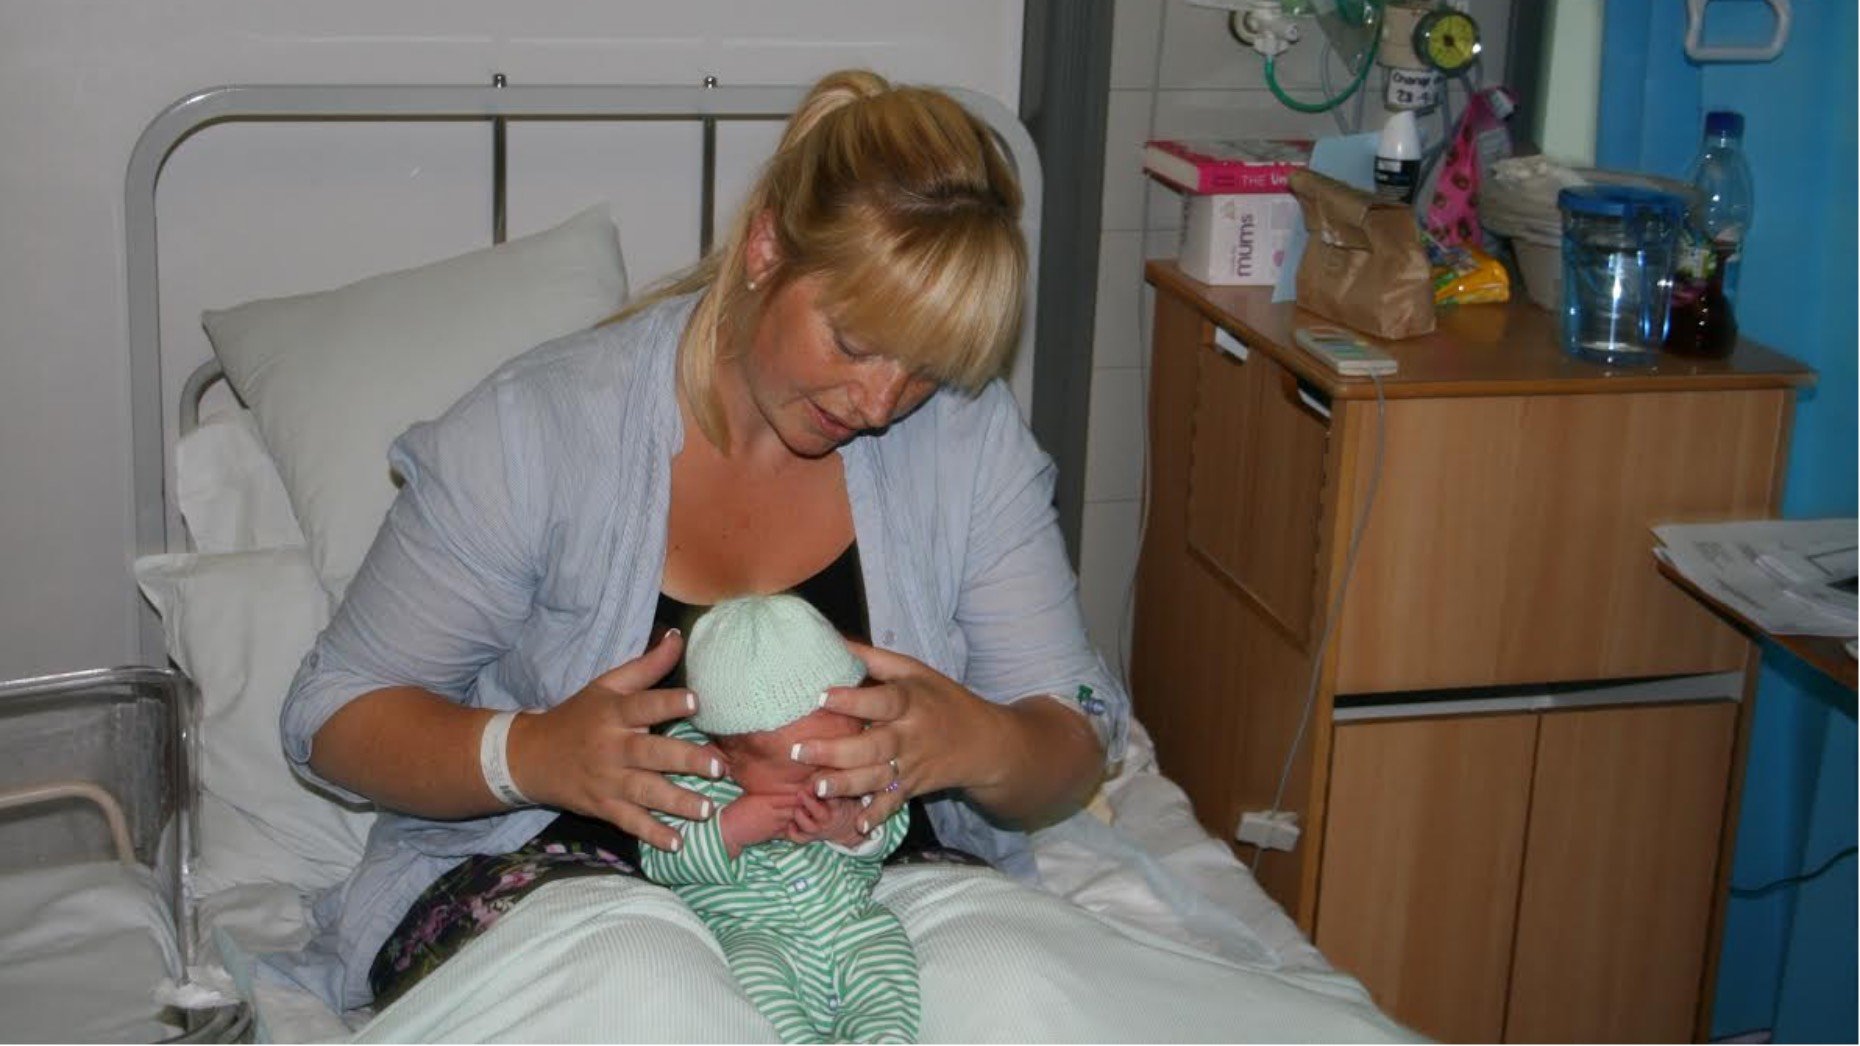 Mother Bonnie Henton puts one of the hats on baby Fergus Henton, aged 2 days.